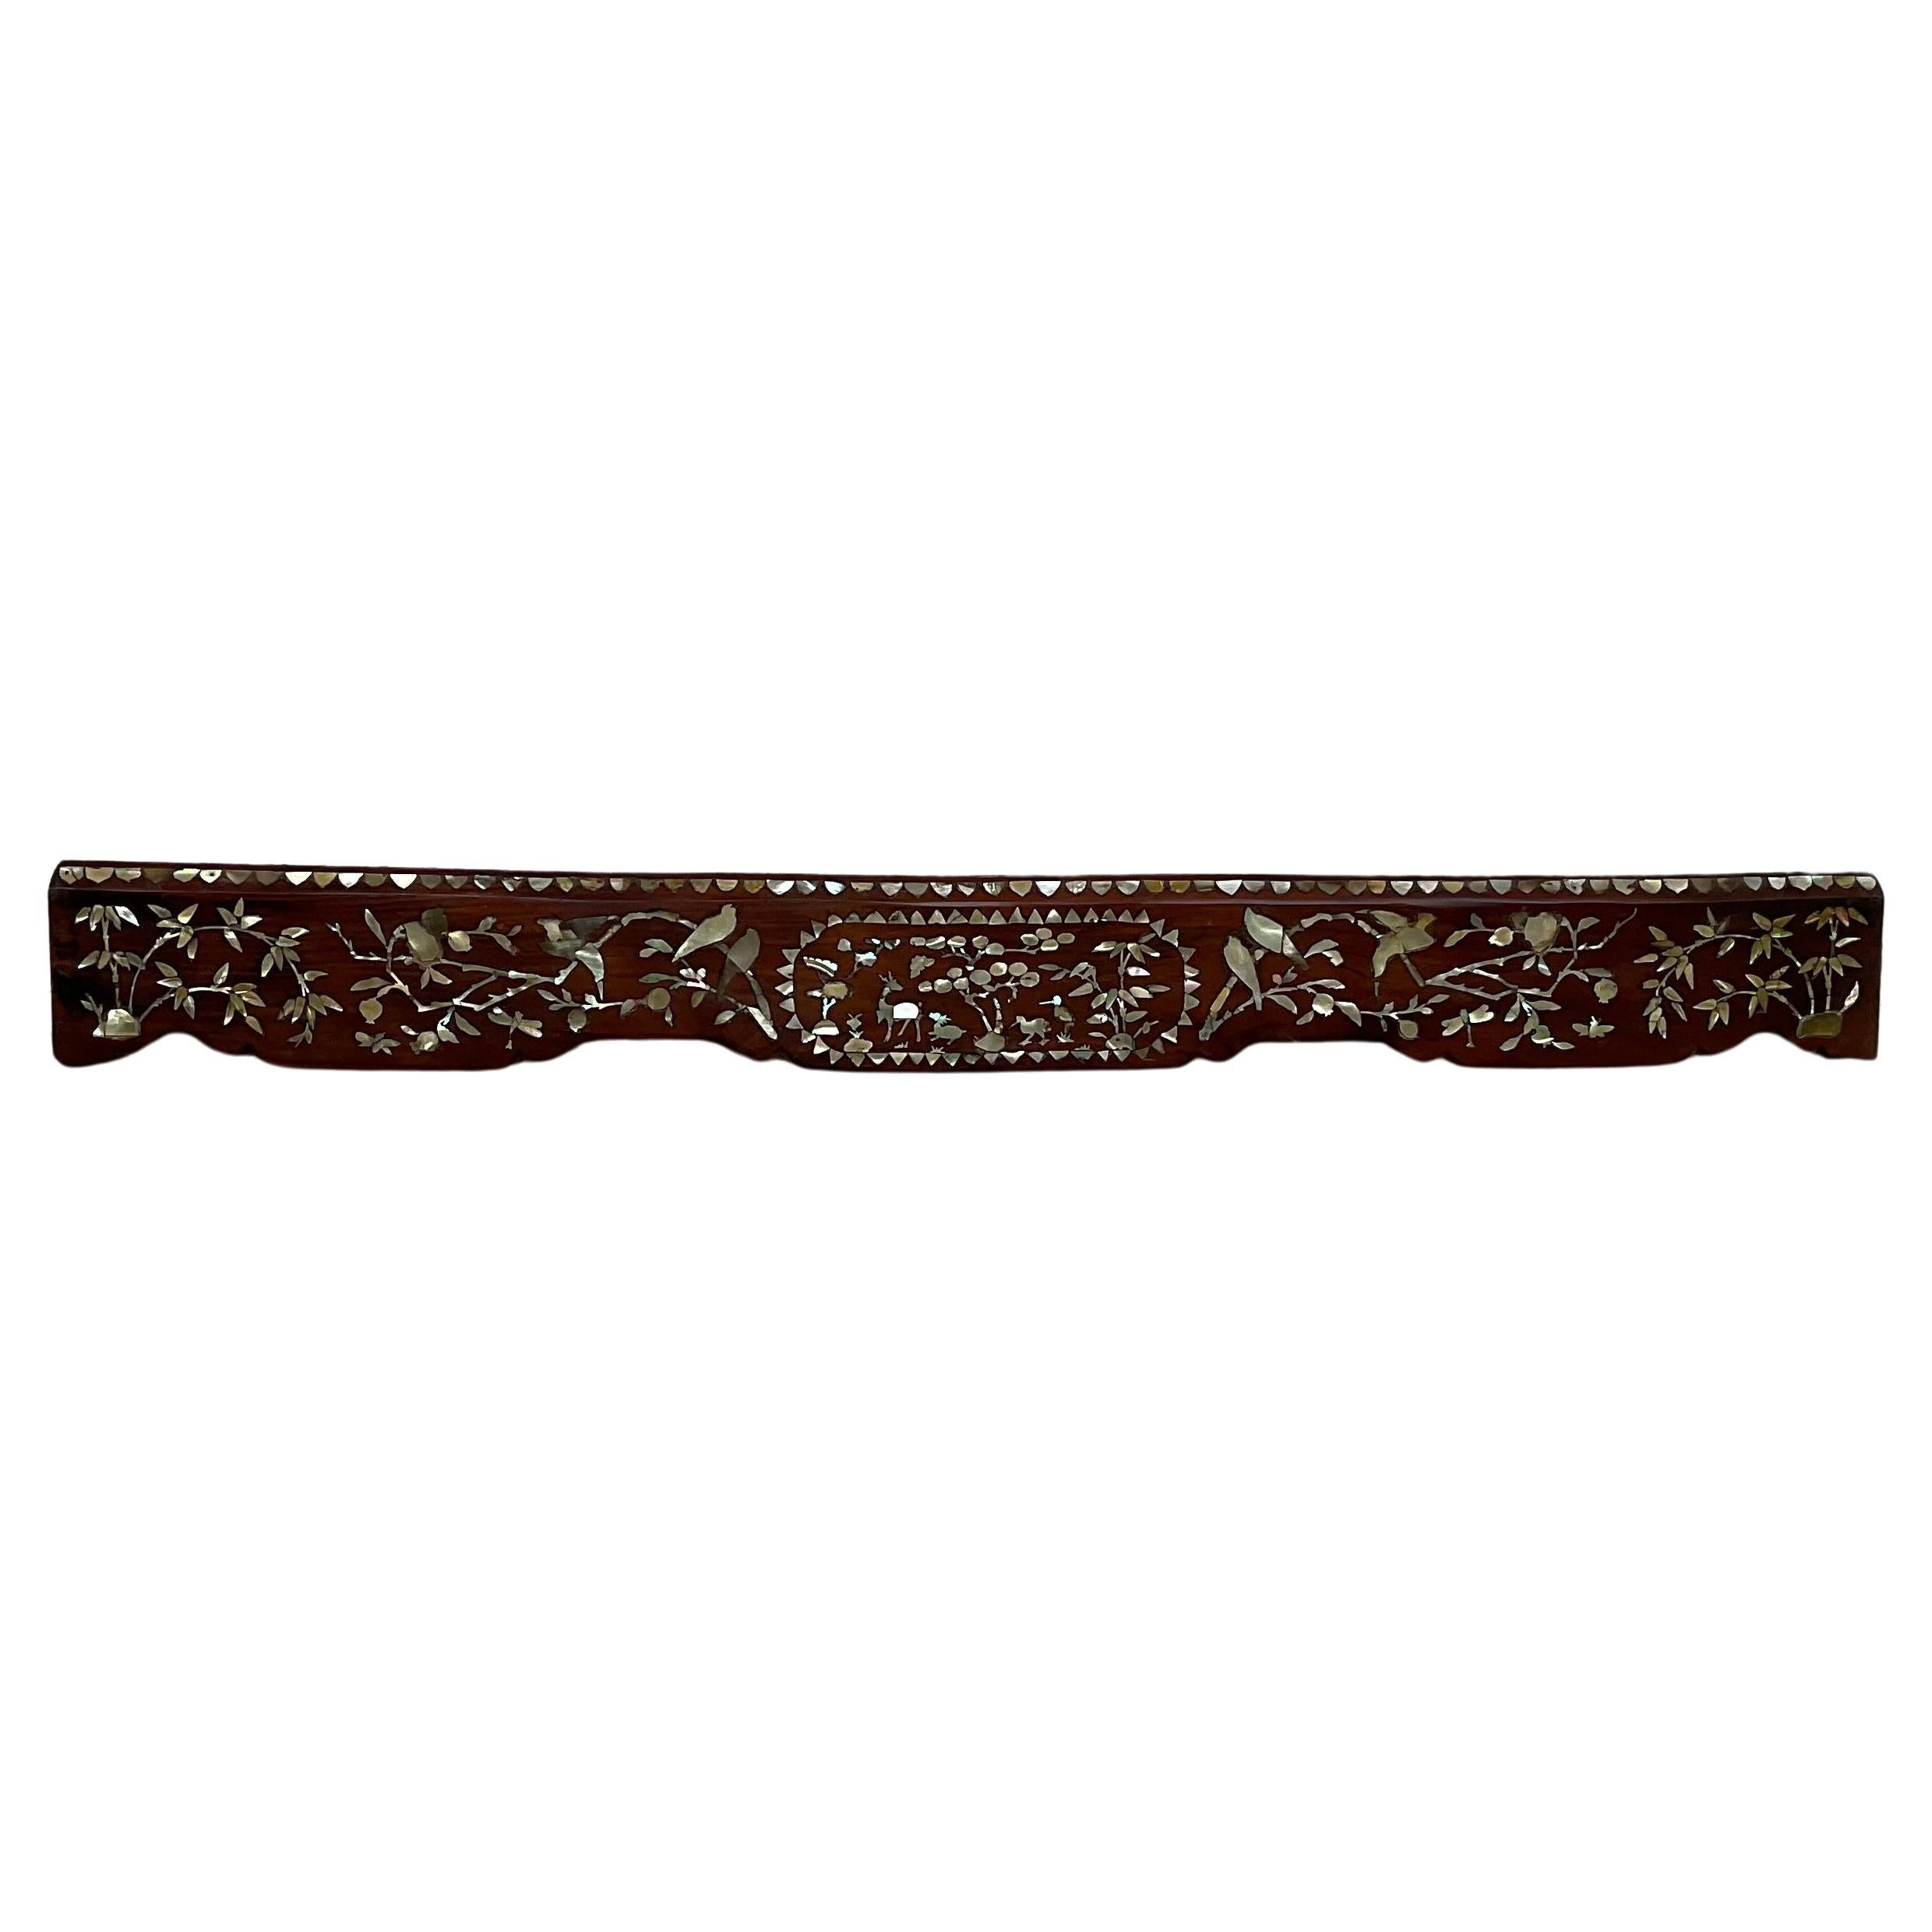 19c Chinese HandCarved Walnut Wood And Mother Of Perl Architectural Element  